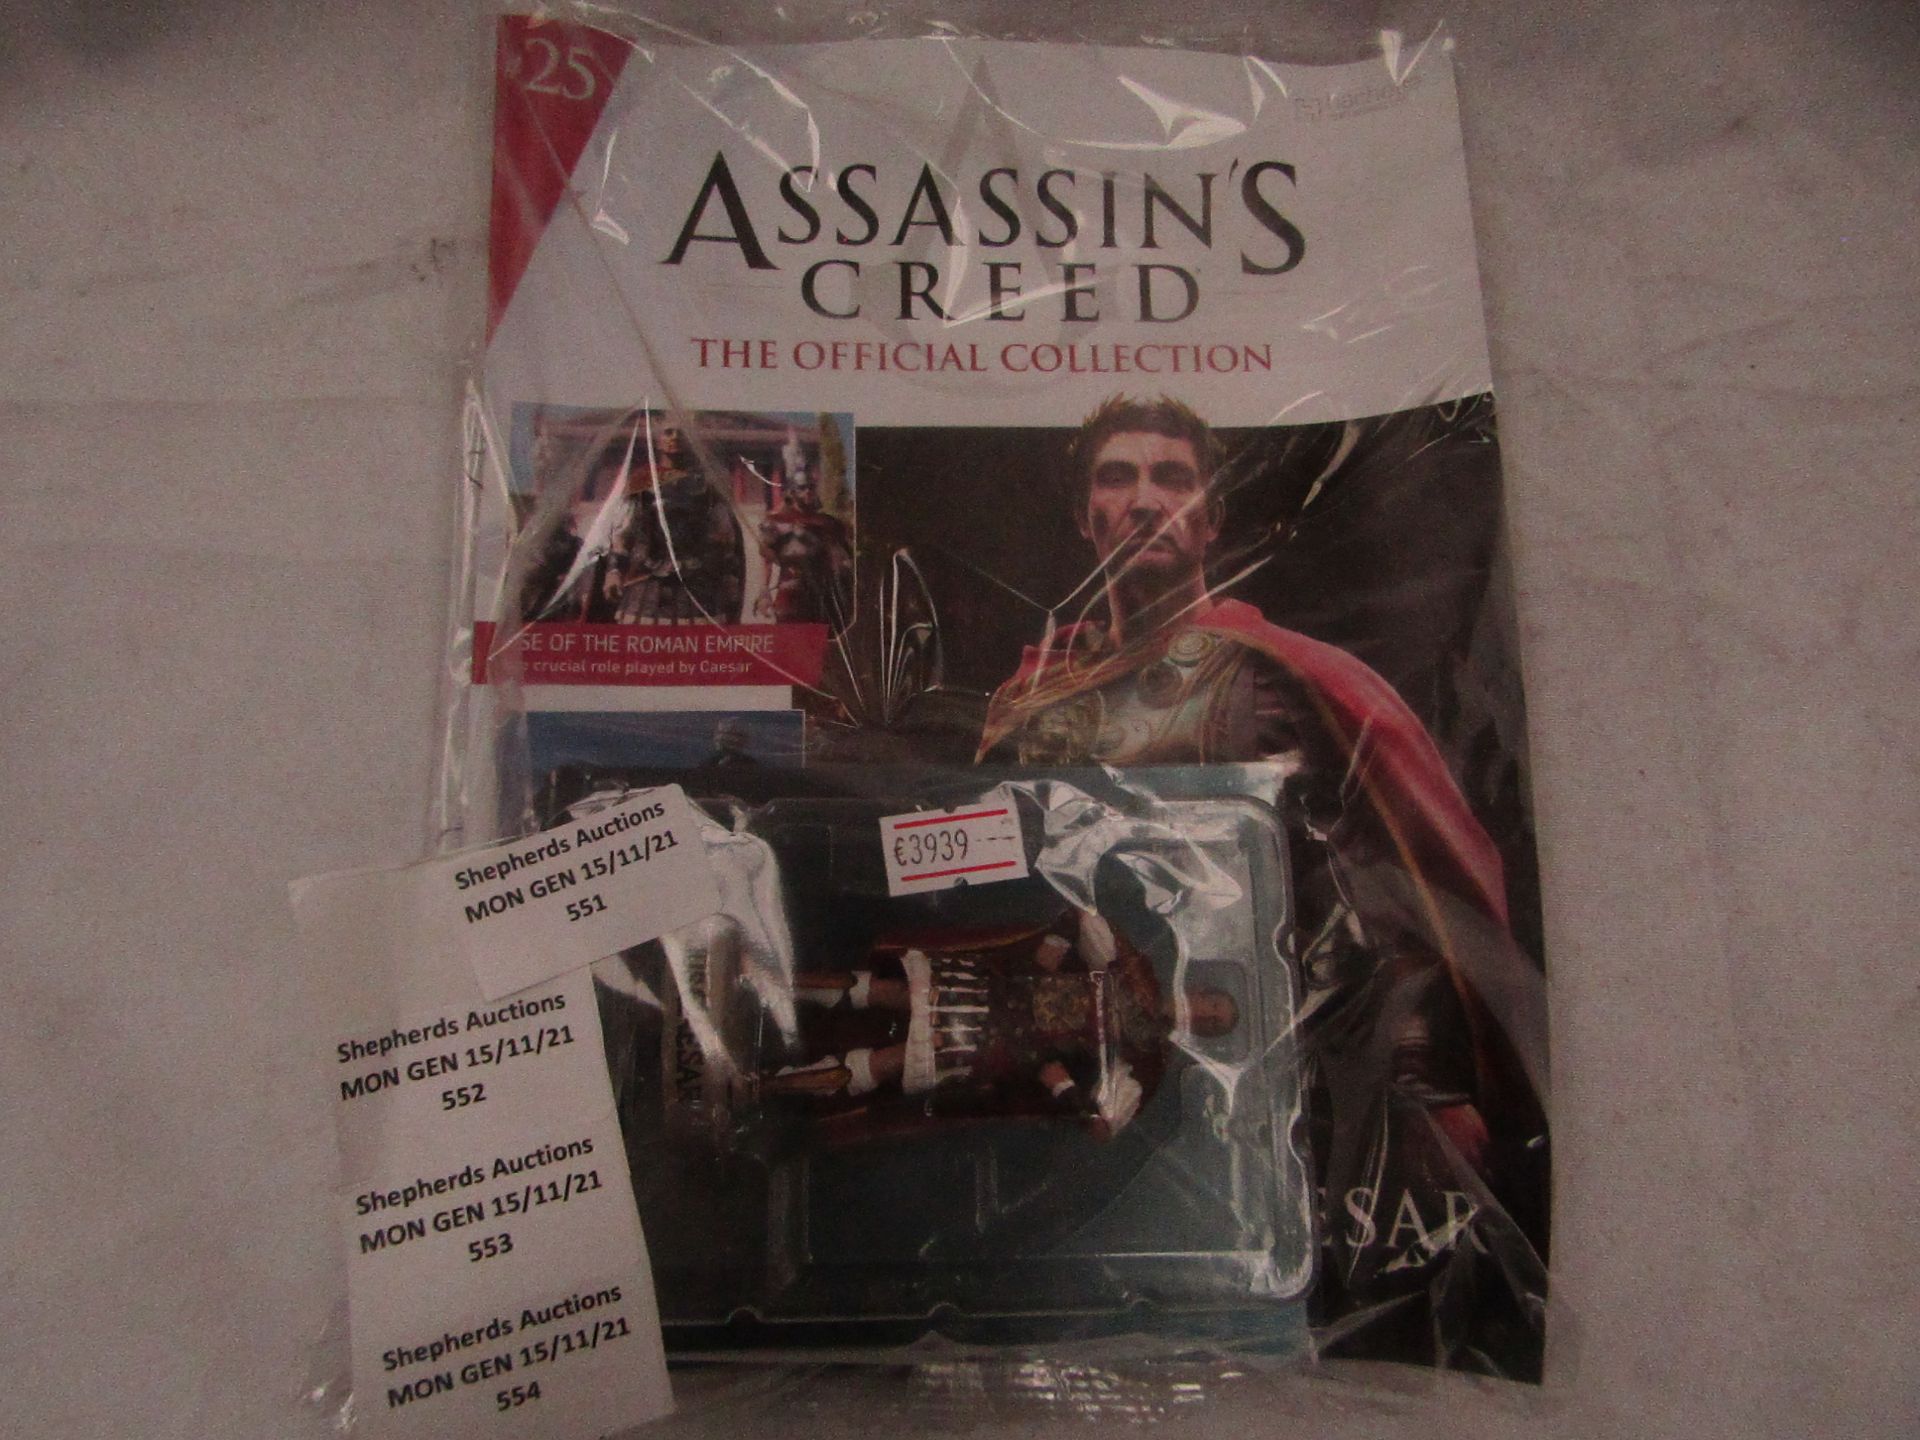 Assassins Creed - The Official Collection Includes Magazine & Collectible ( Julius Caesar ) -